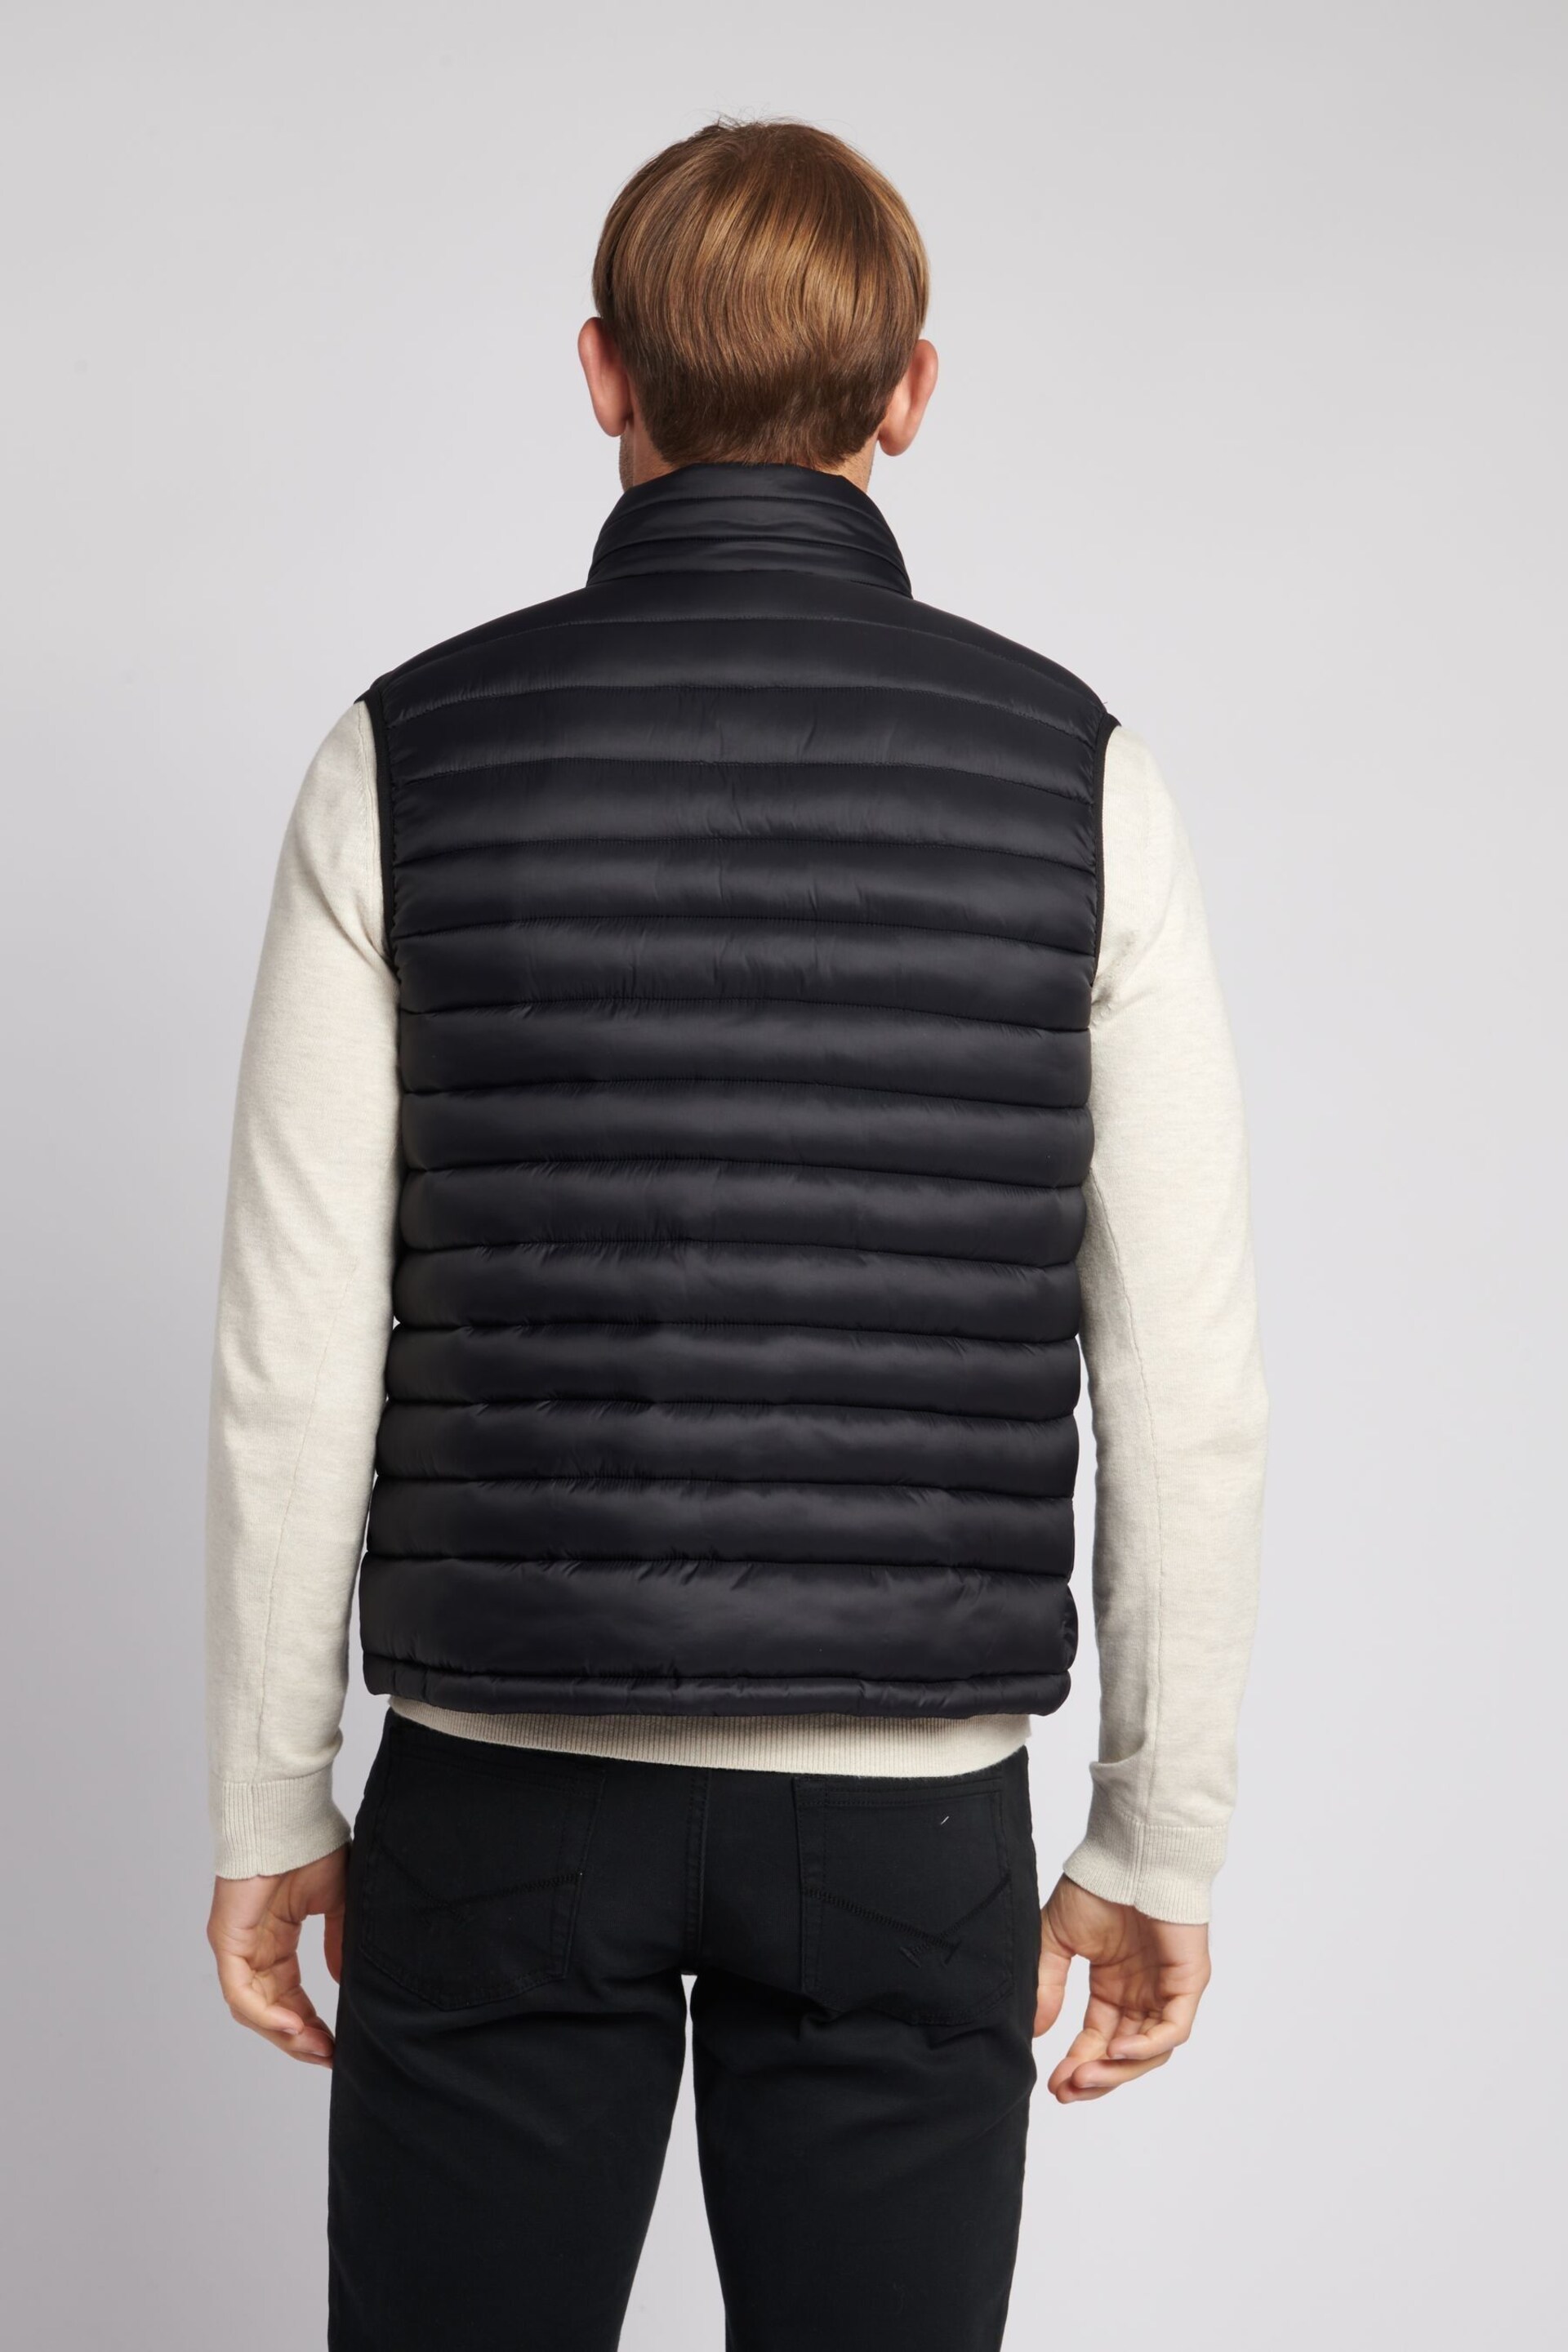 U.S. Polo Assn. Mens Lightweight Quilted Tape Black Gilet - Image 2 of 7